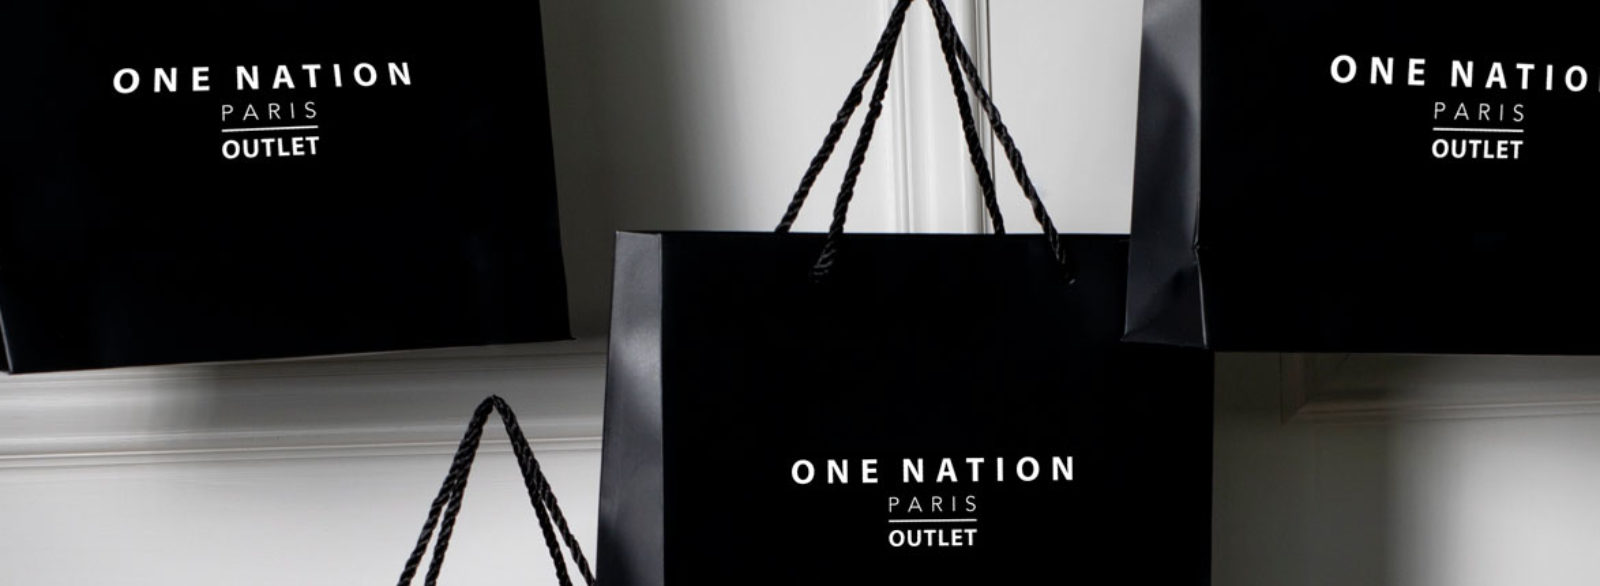 Lifestyle outlet, fashion outlet: One Nation Paris